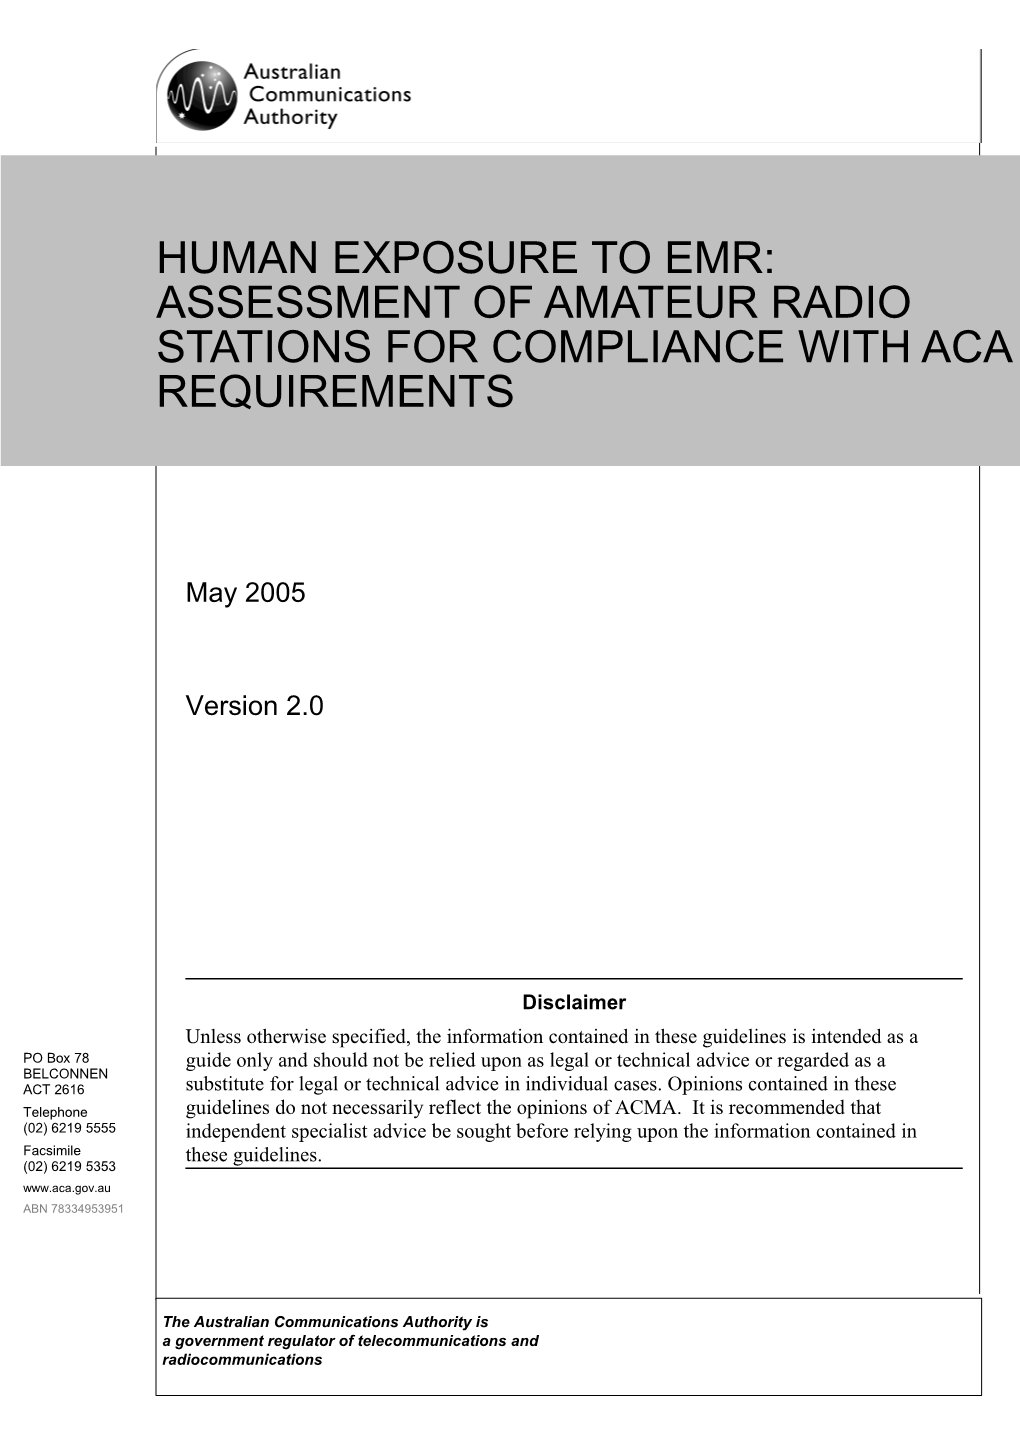 Human Exposure to EMR: Assessment of Amateur Radio Stations